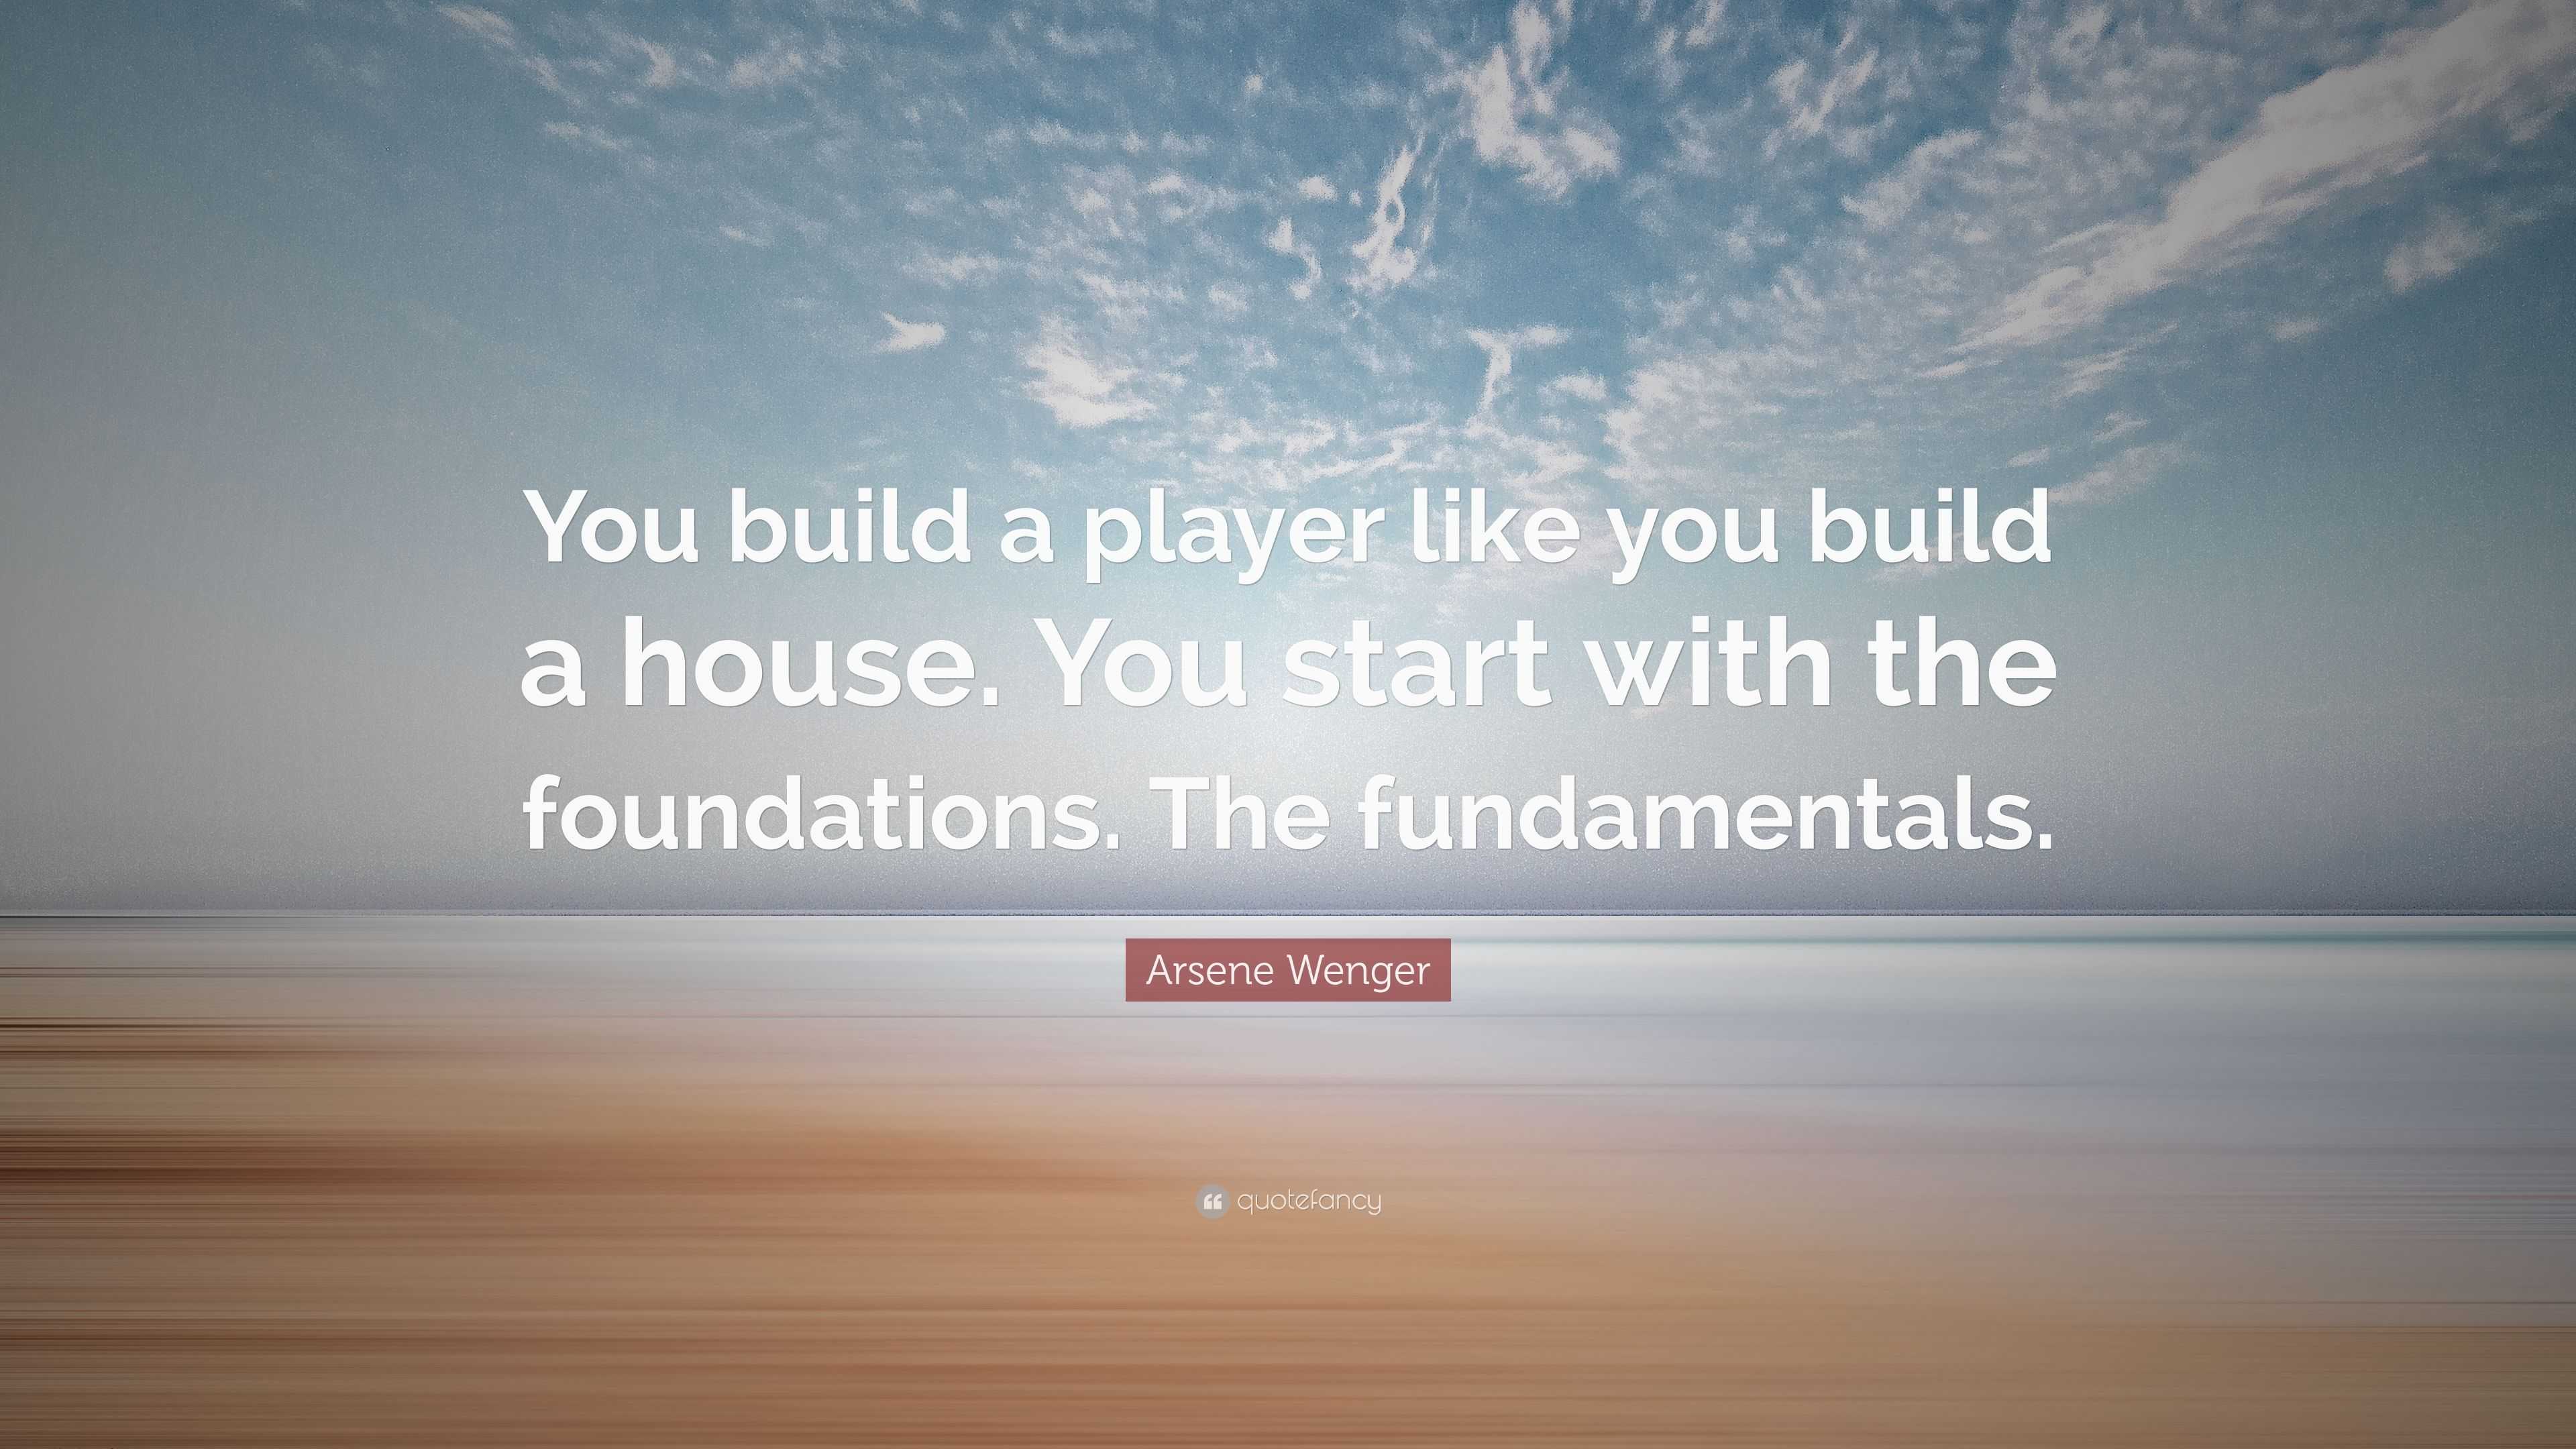 Arsene Wenger Quote: "You build a player like you build a ...